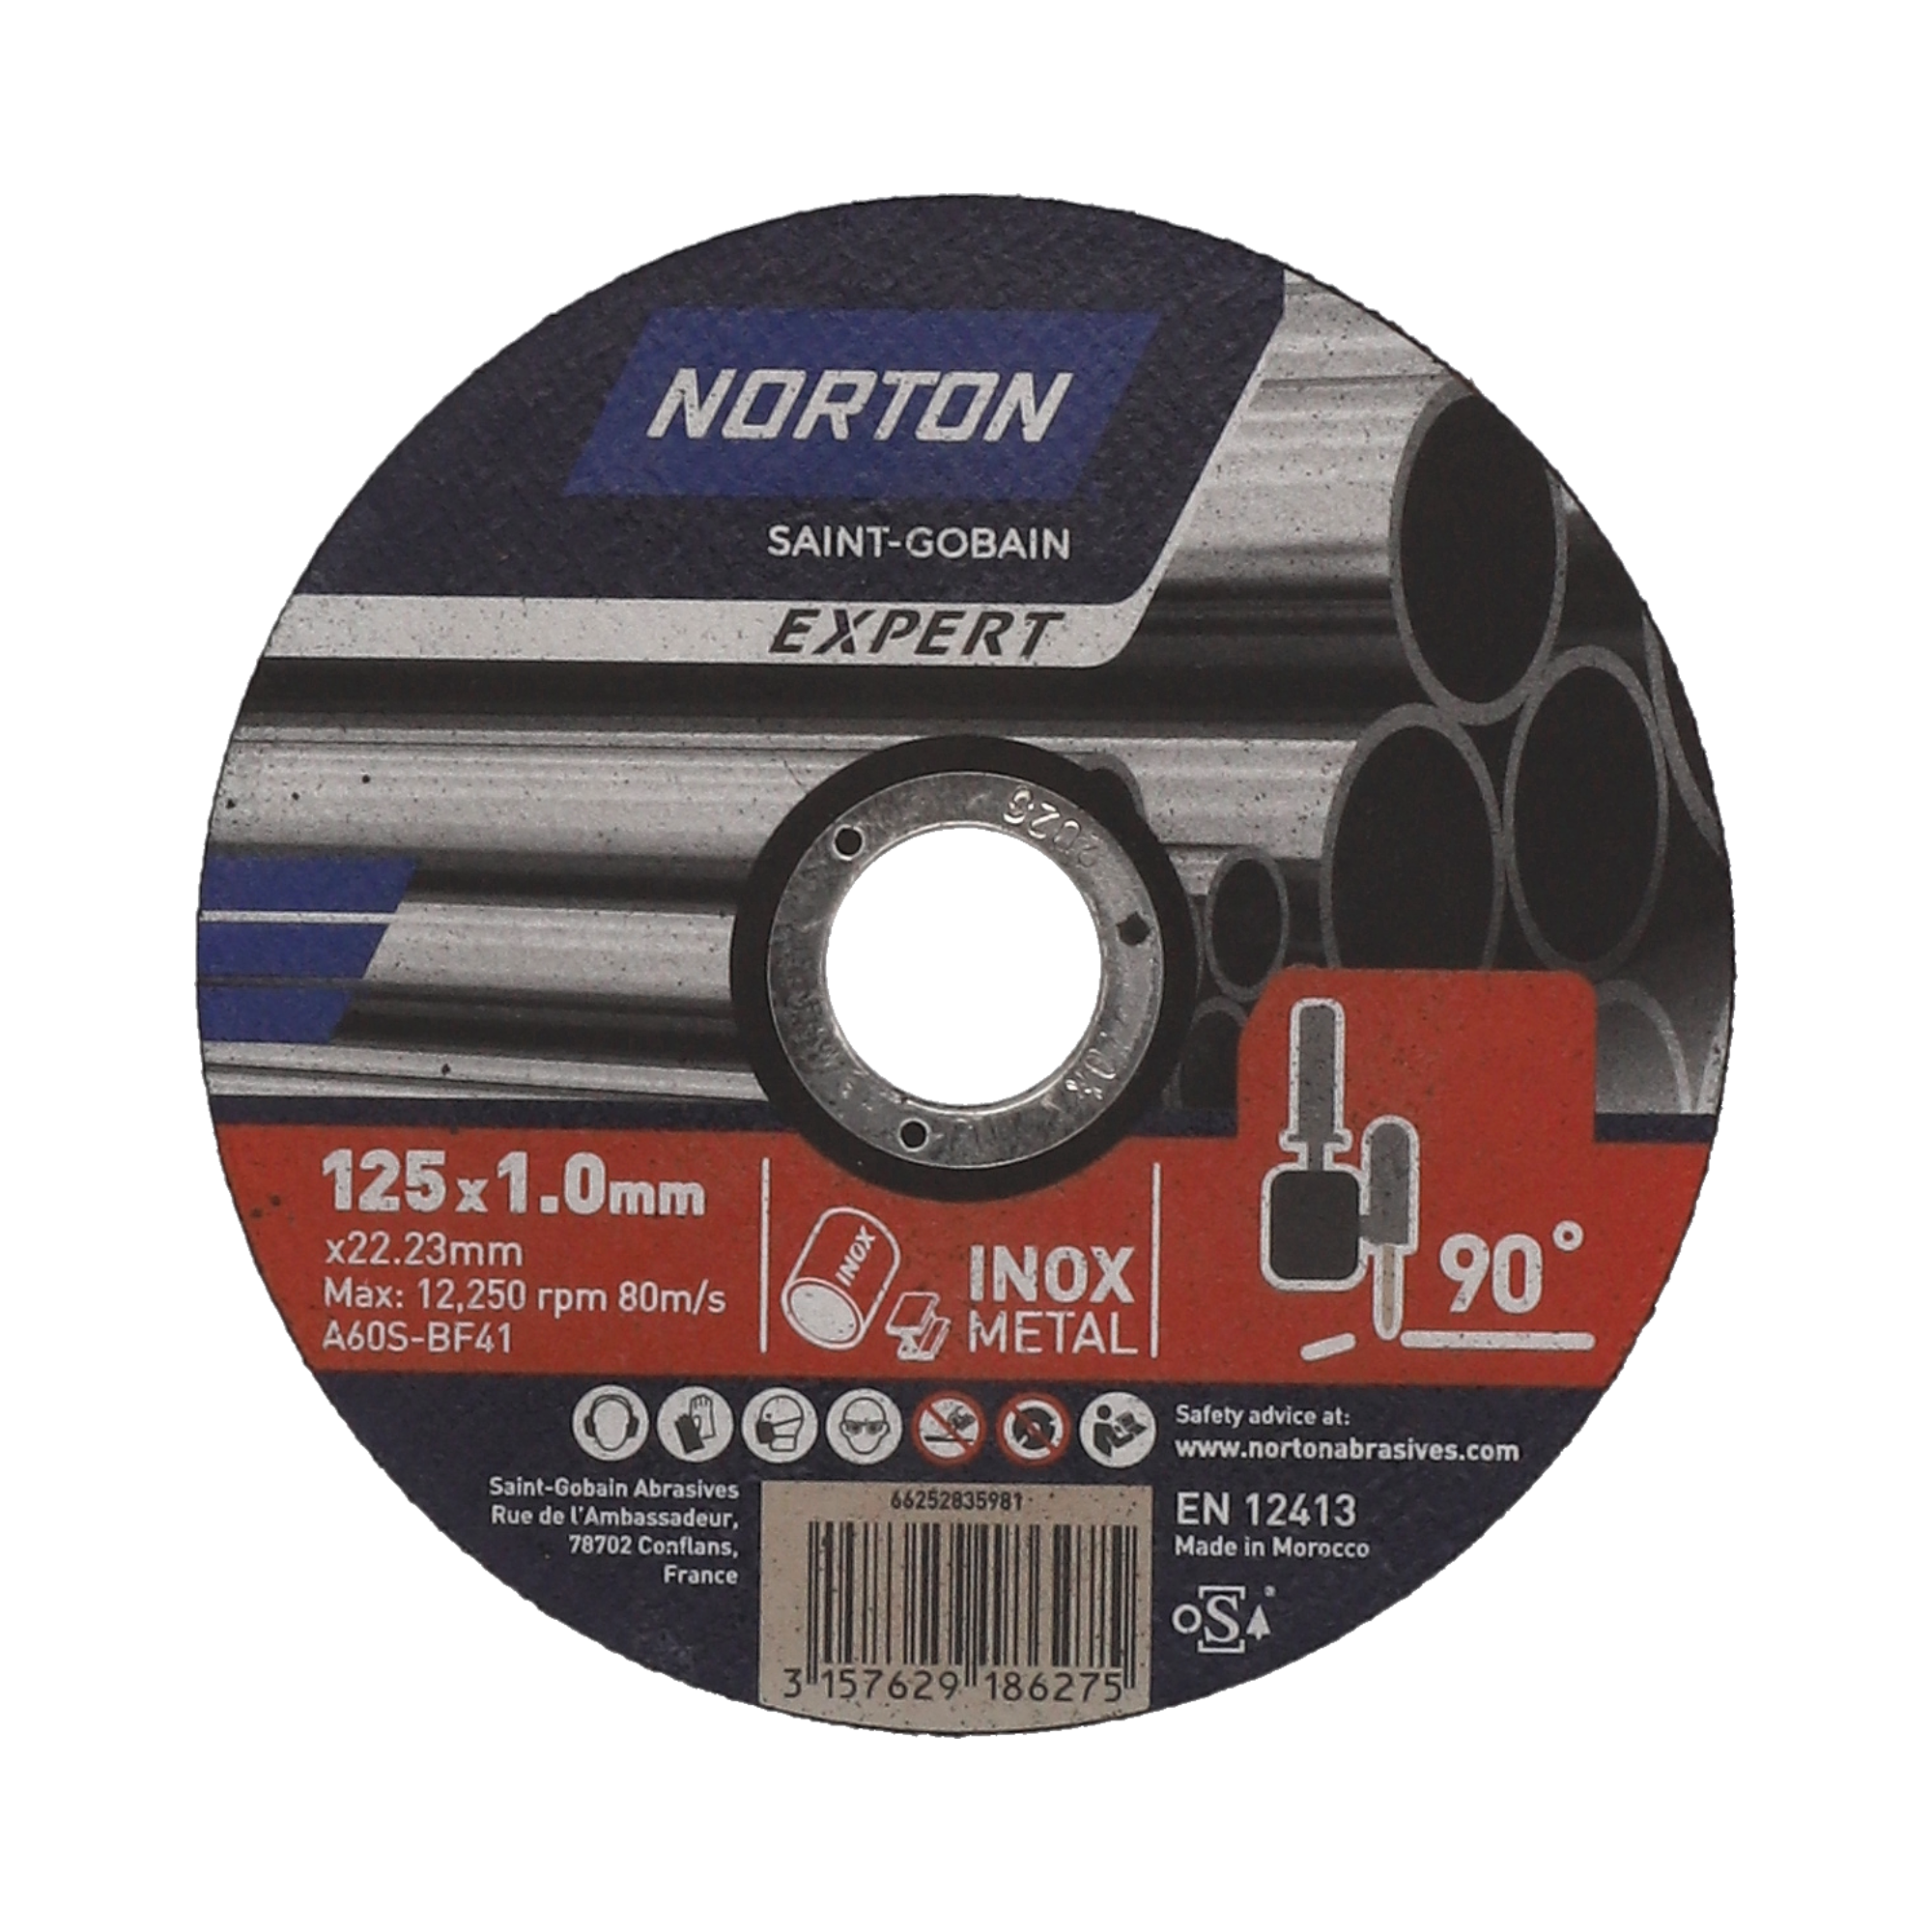 Trennscheibe 'Norton Expert' Ø 125 mm + product picture